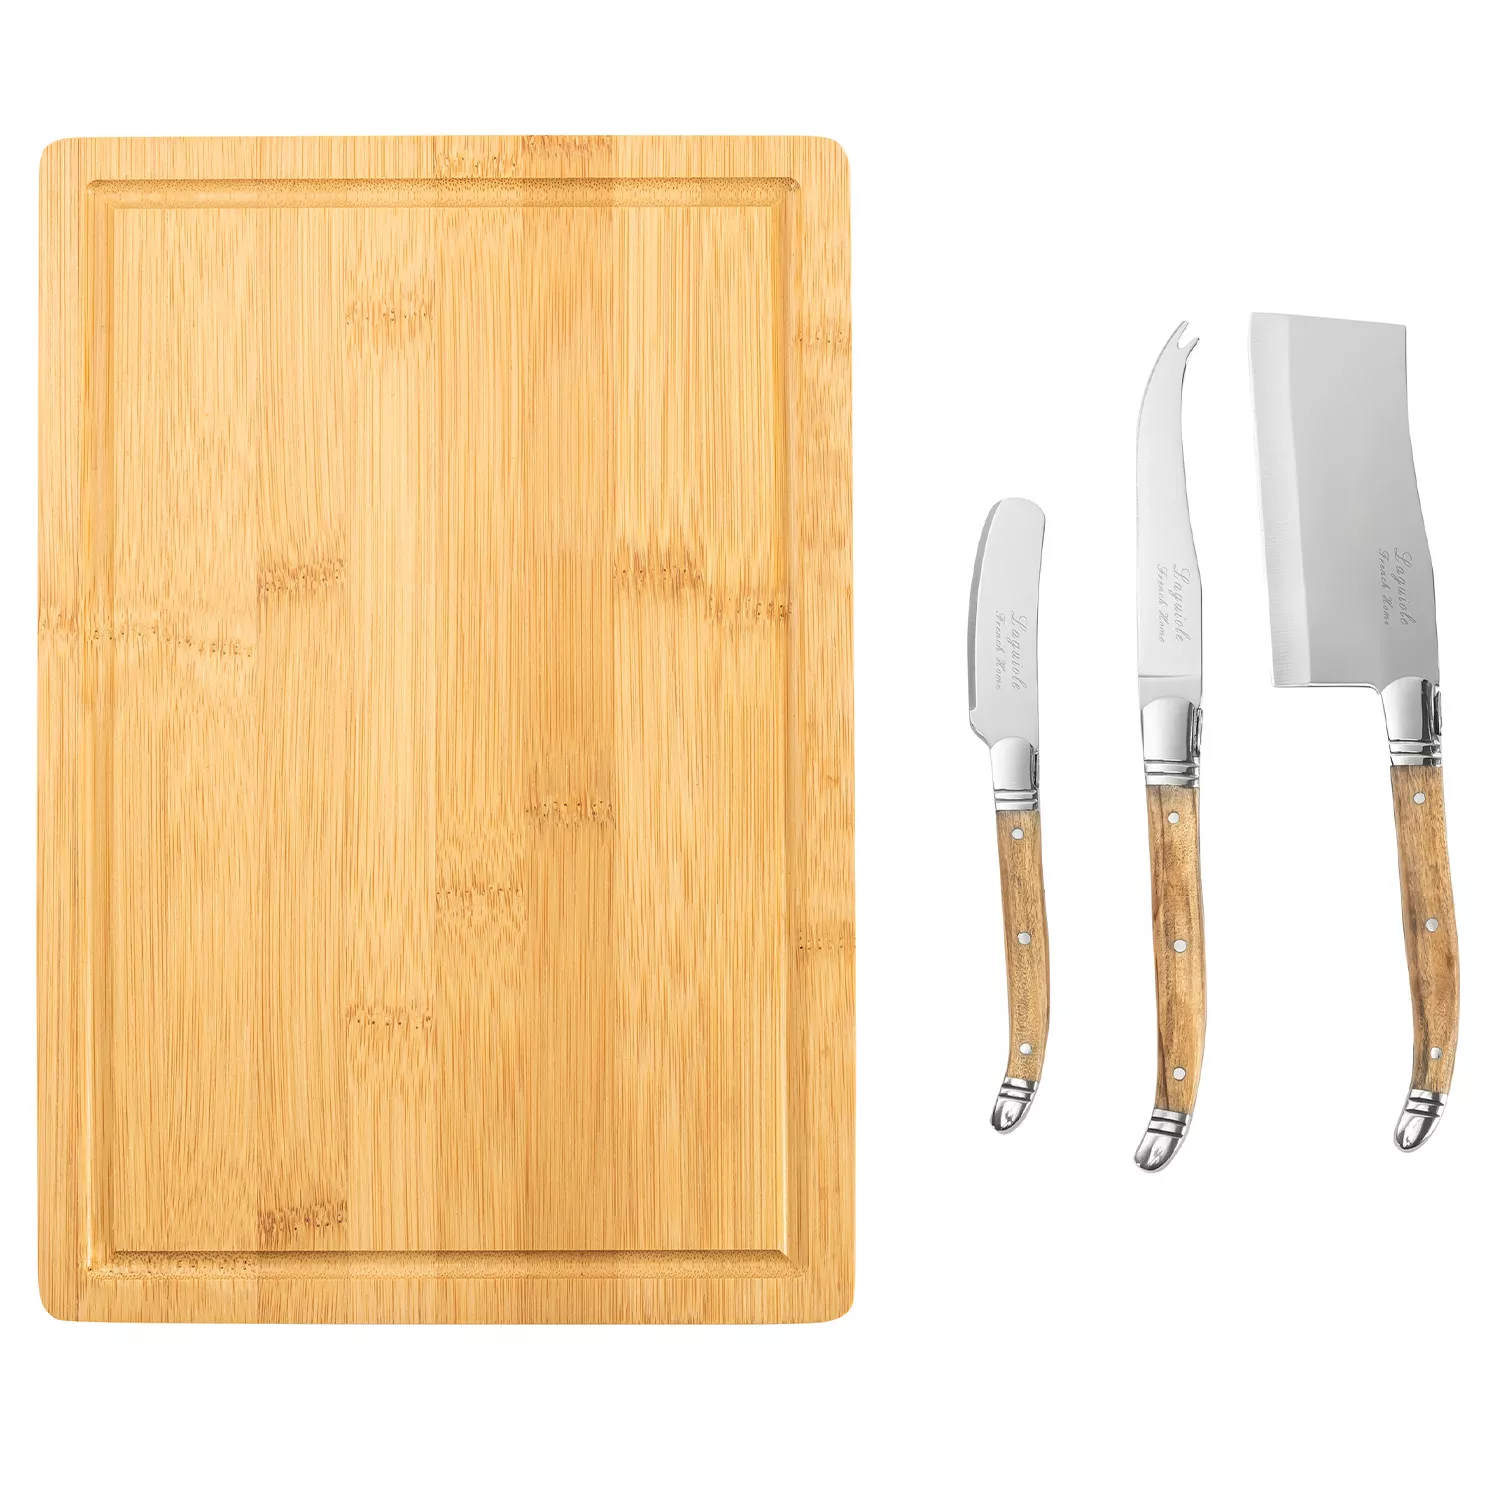 Cheese Tools (Wooden Cutting Board + Spoon Grater + Knife + Slicer